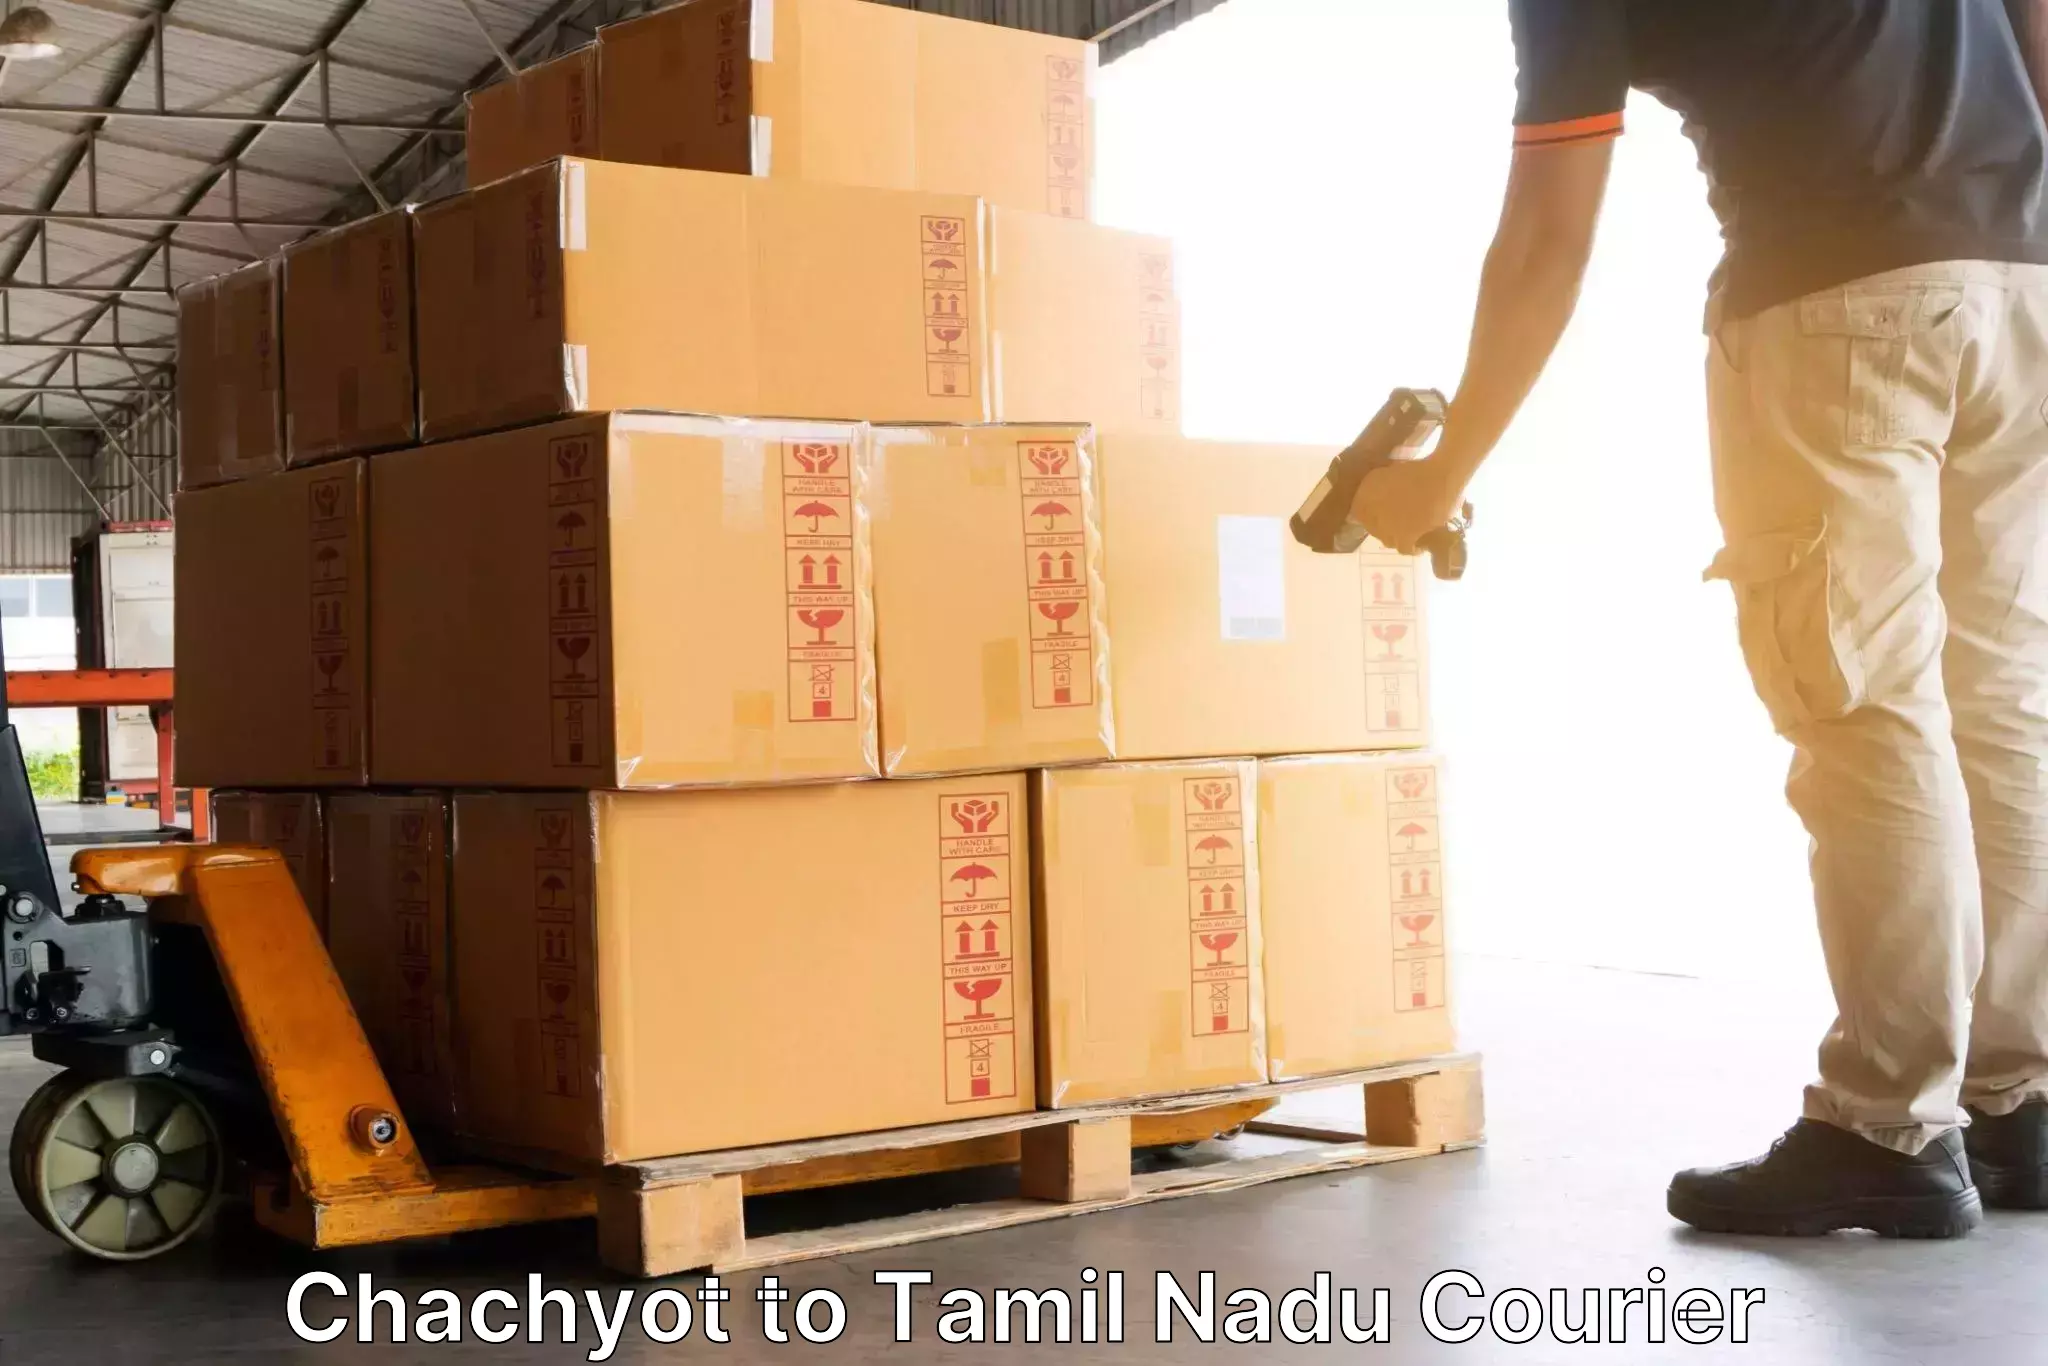 Nationwide shipping coverage Chachyot to Ennore Port Chennai